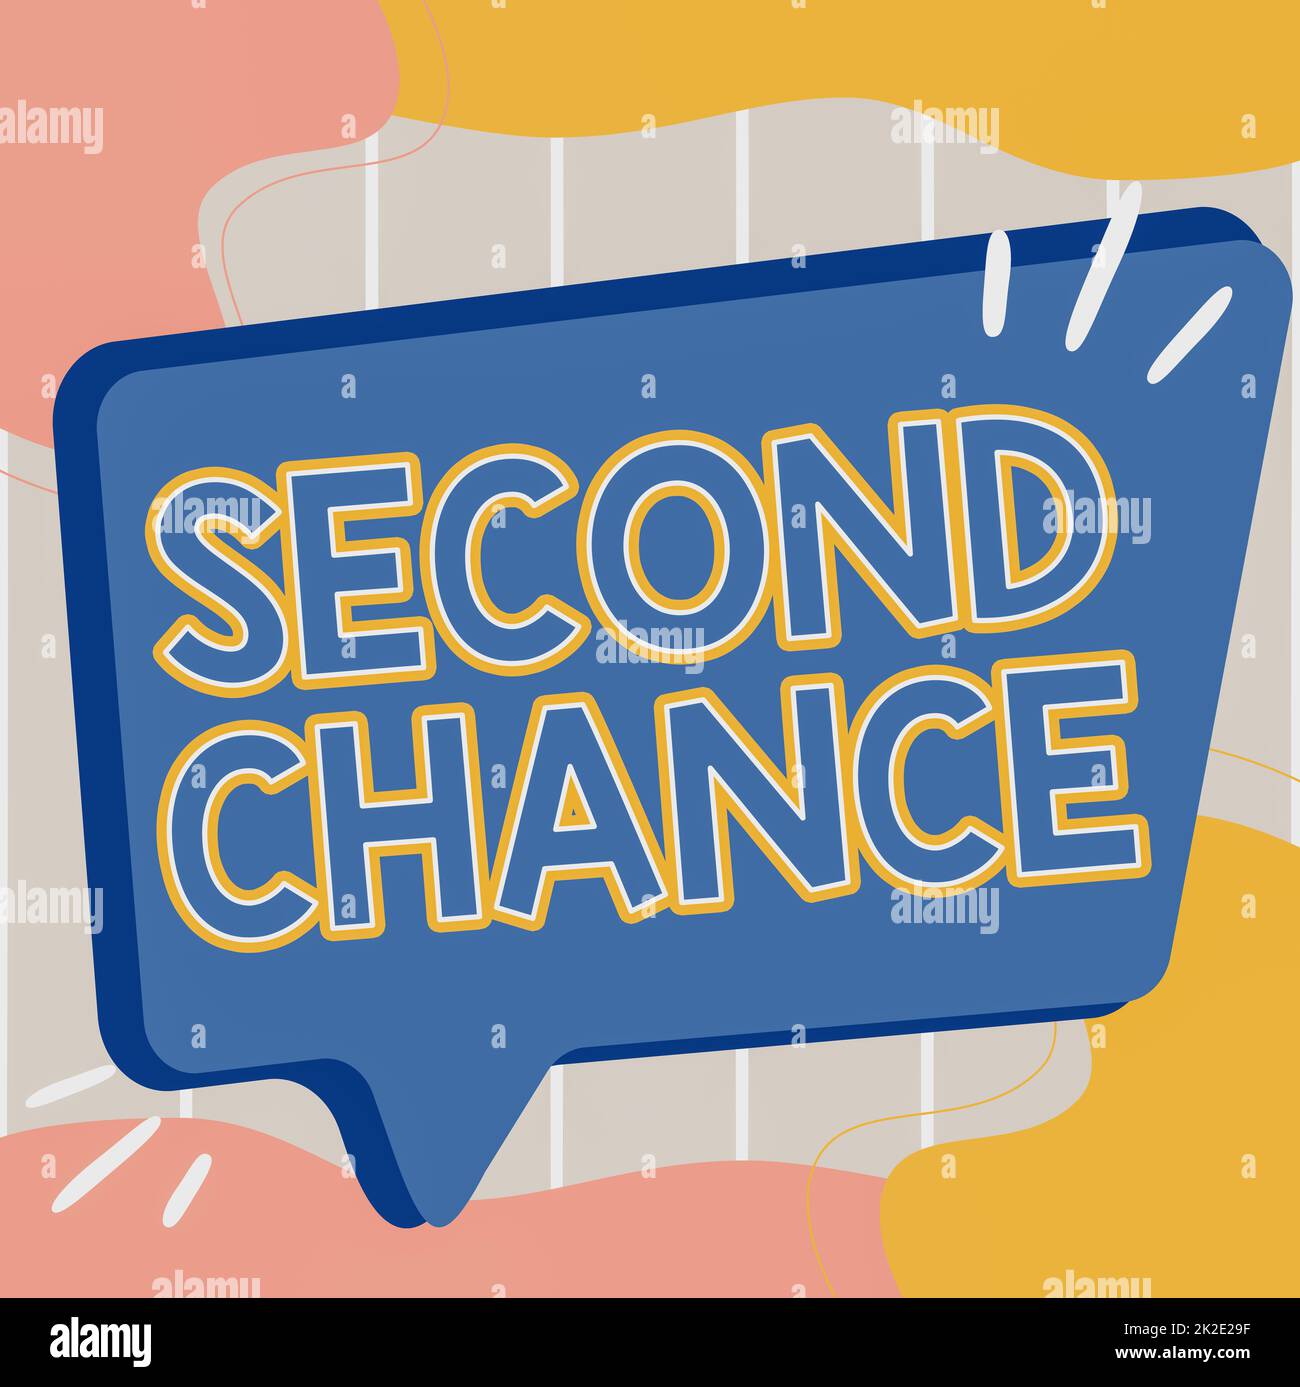 Text sign showing Second Chance. Concept meaning Giving another shot Engaged again to business venture Illustration Of Empty Big Chat Box For Waiting For Advertisement. Stock Photo